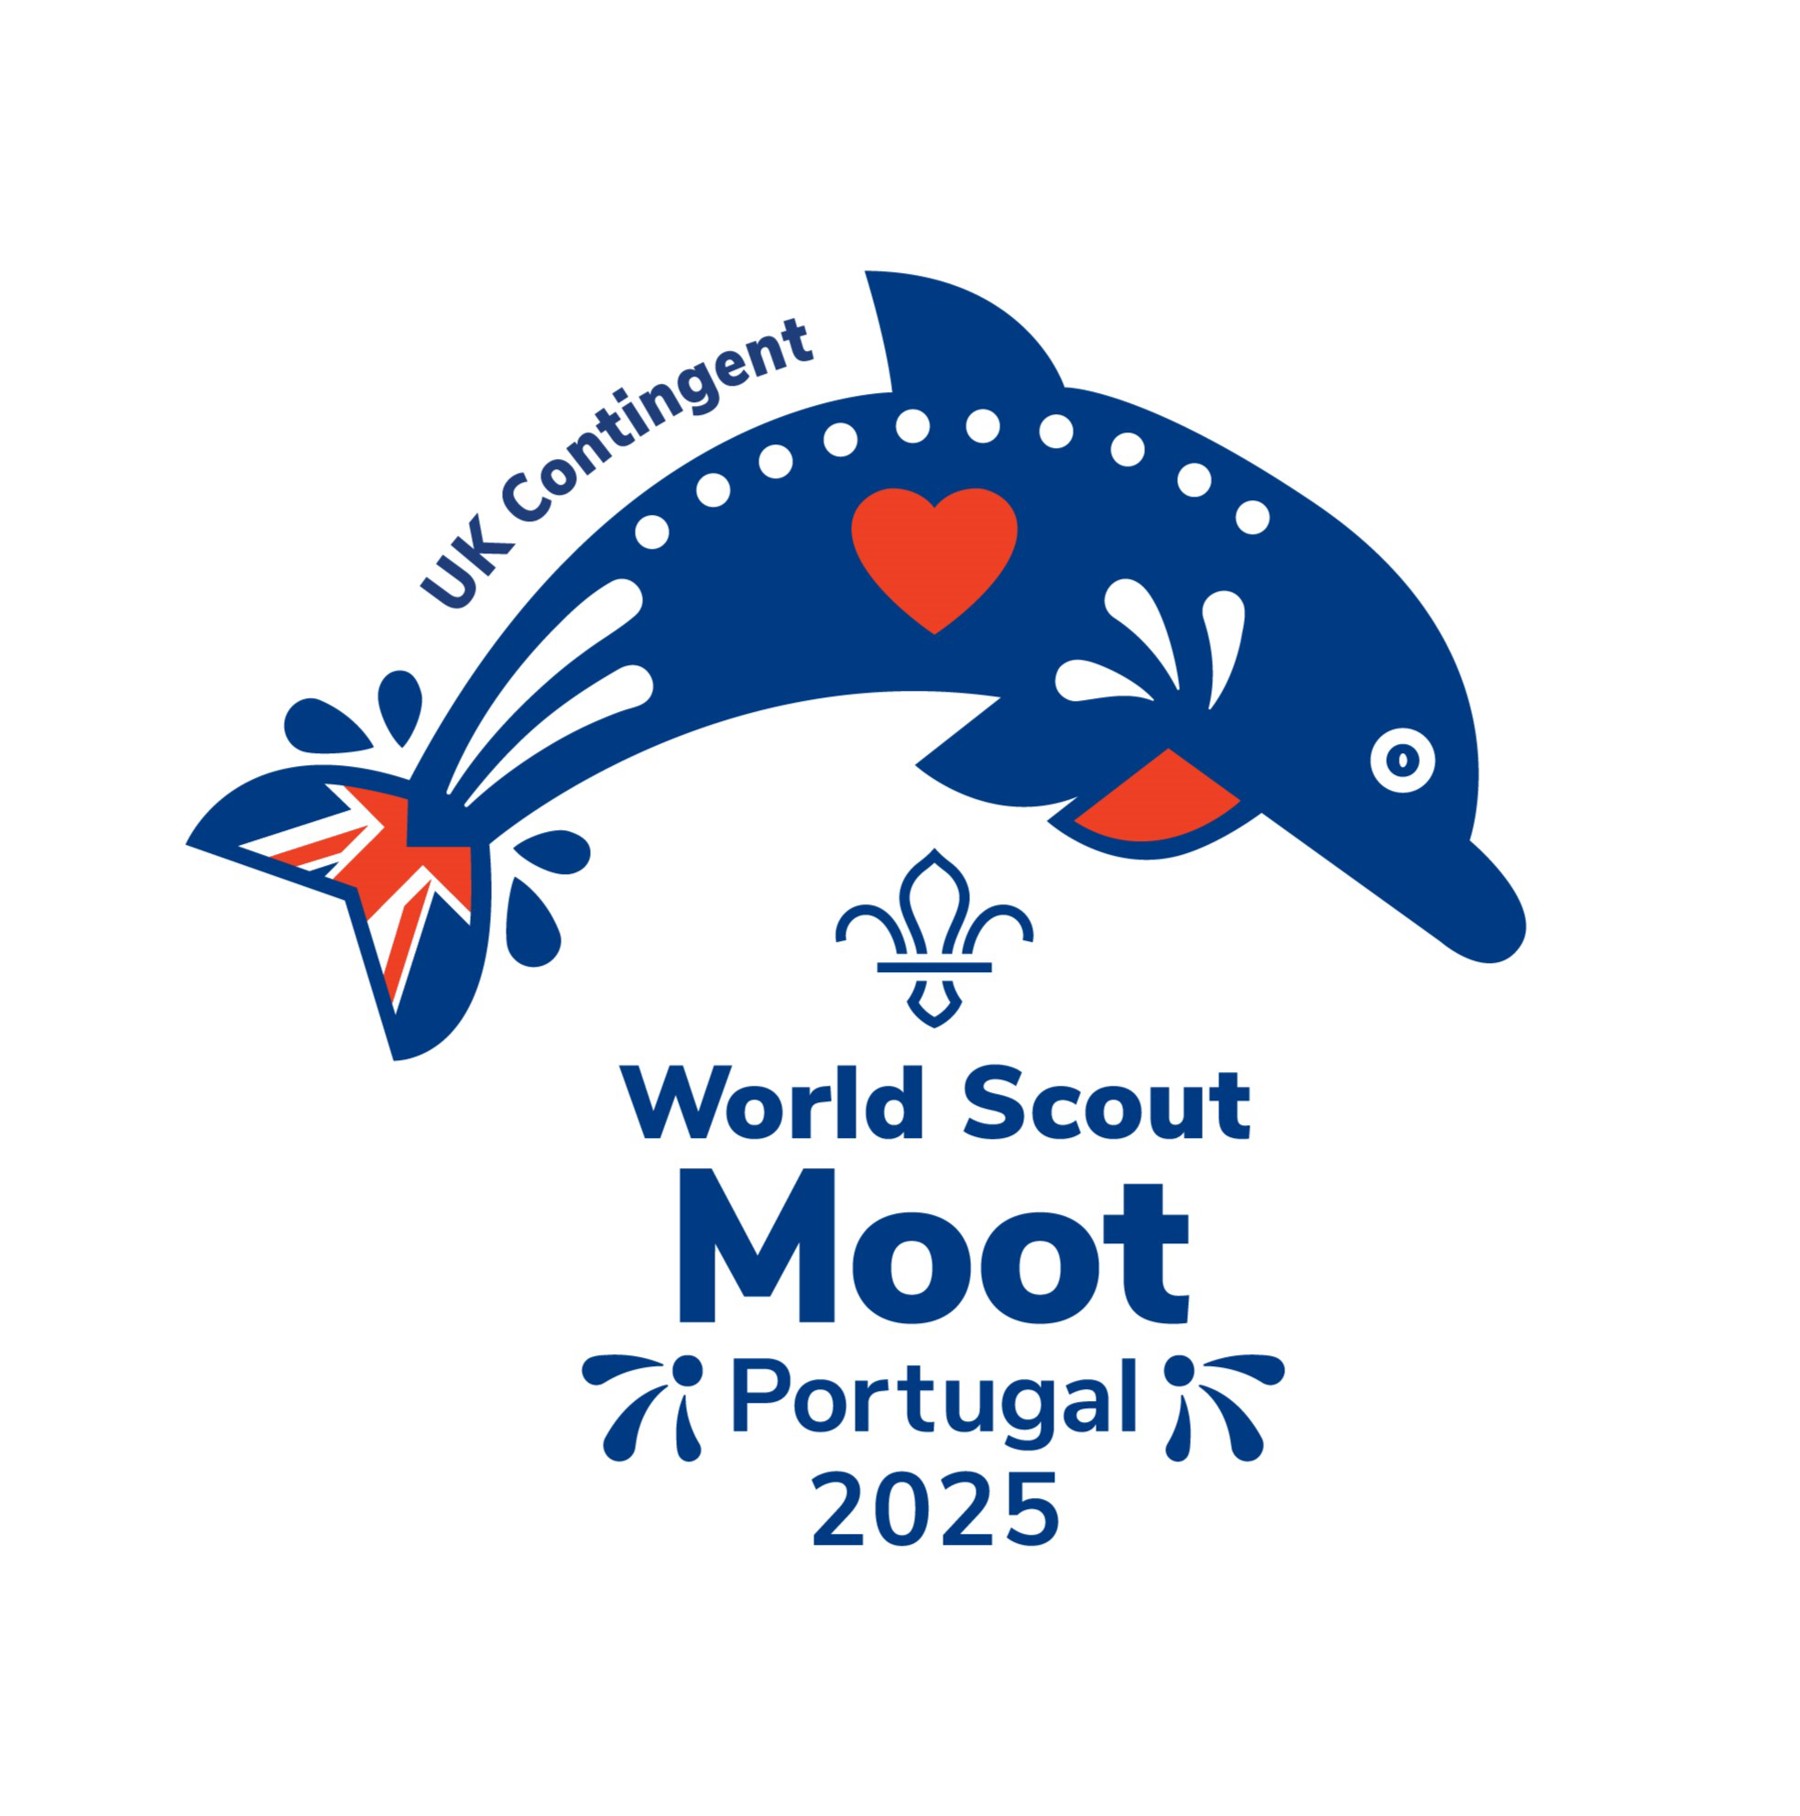 Photography showing the UK Contingent logo for the World Scout Moot 2025.